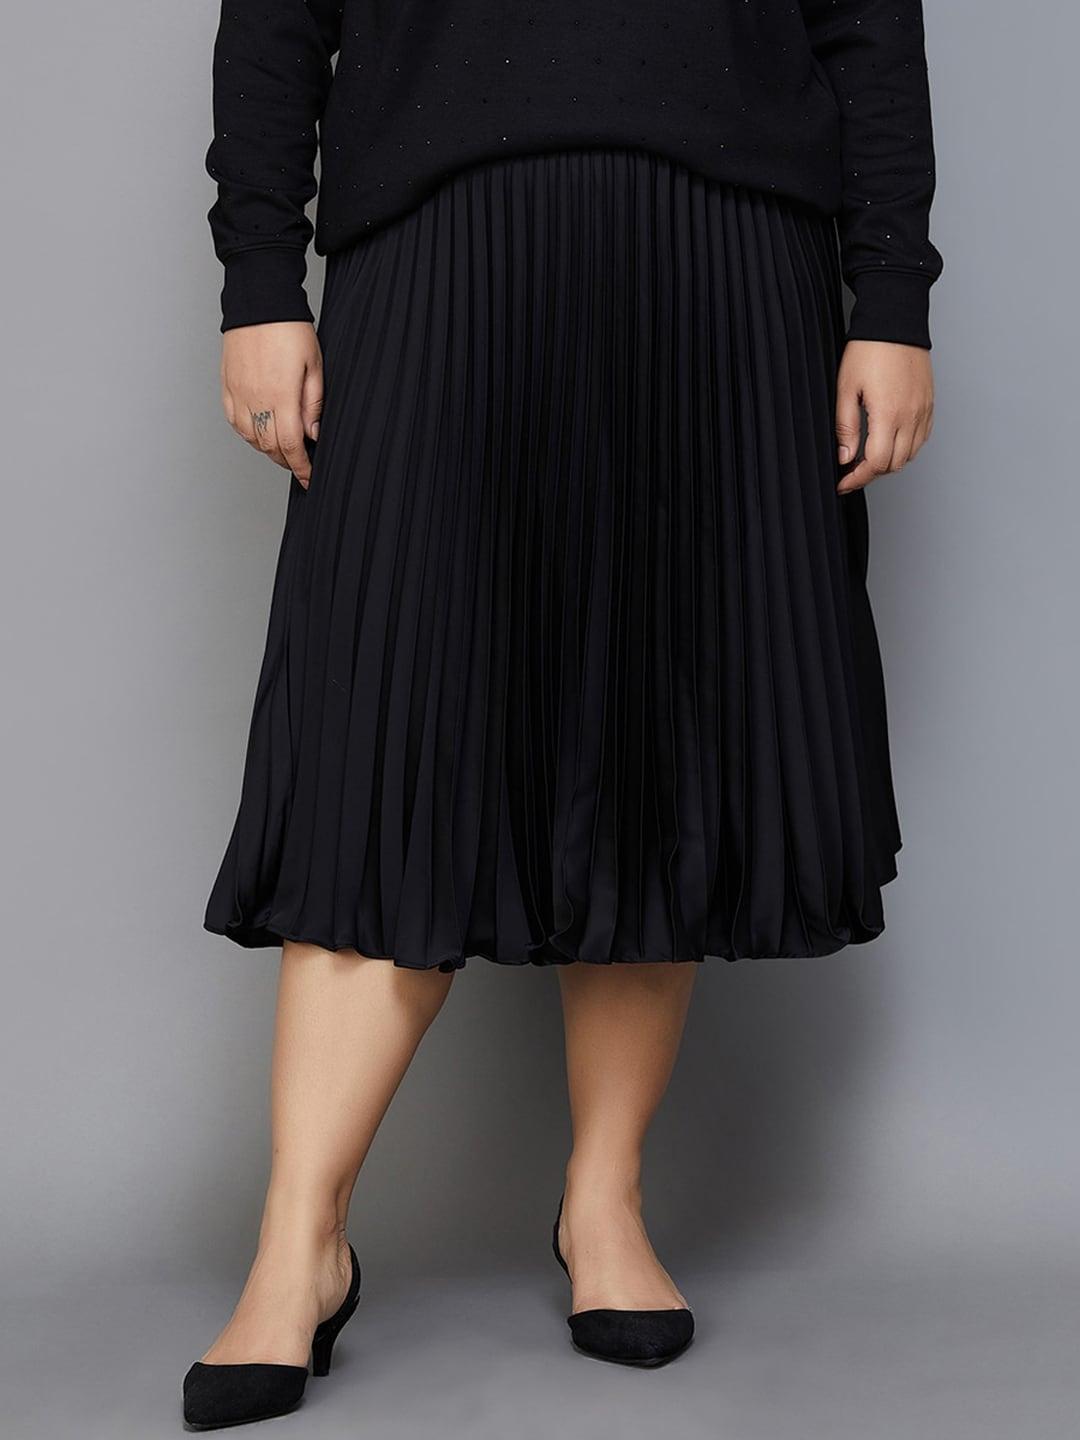 Nexus by Lifestyle A-Line Accordion Pleated Skirt